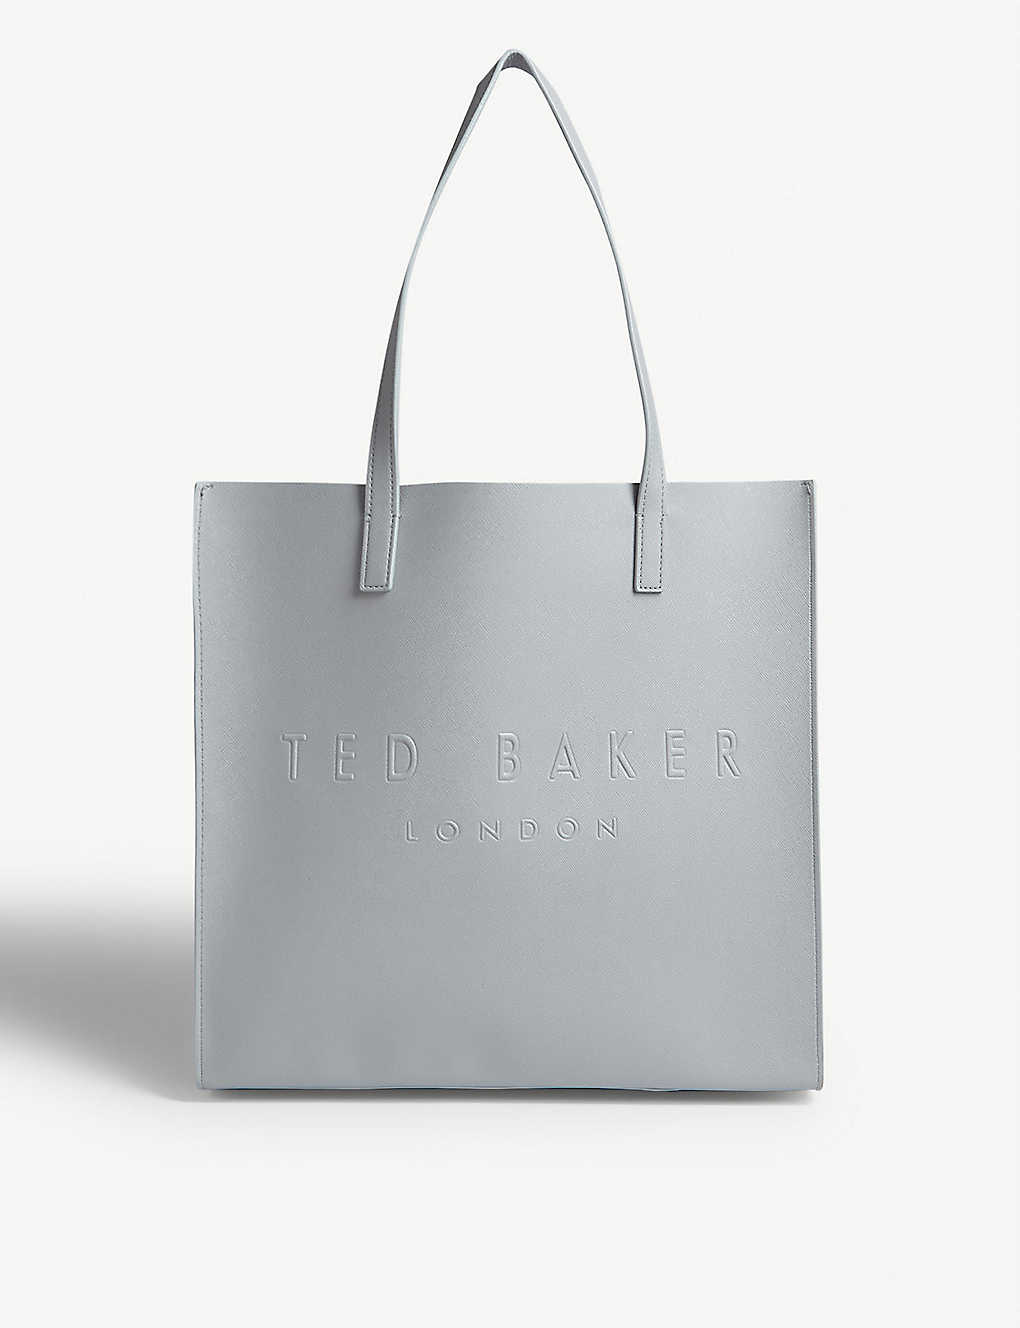 TED BAKER - Icon leather tote bag | Selfridges.com